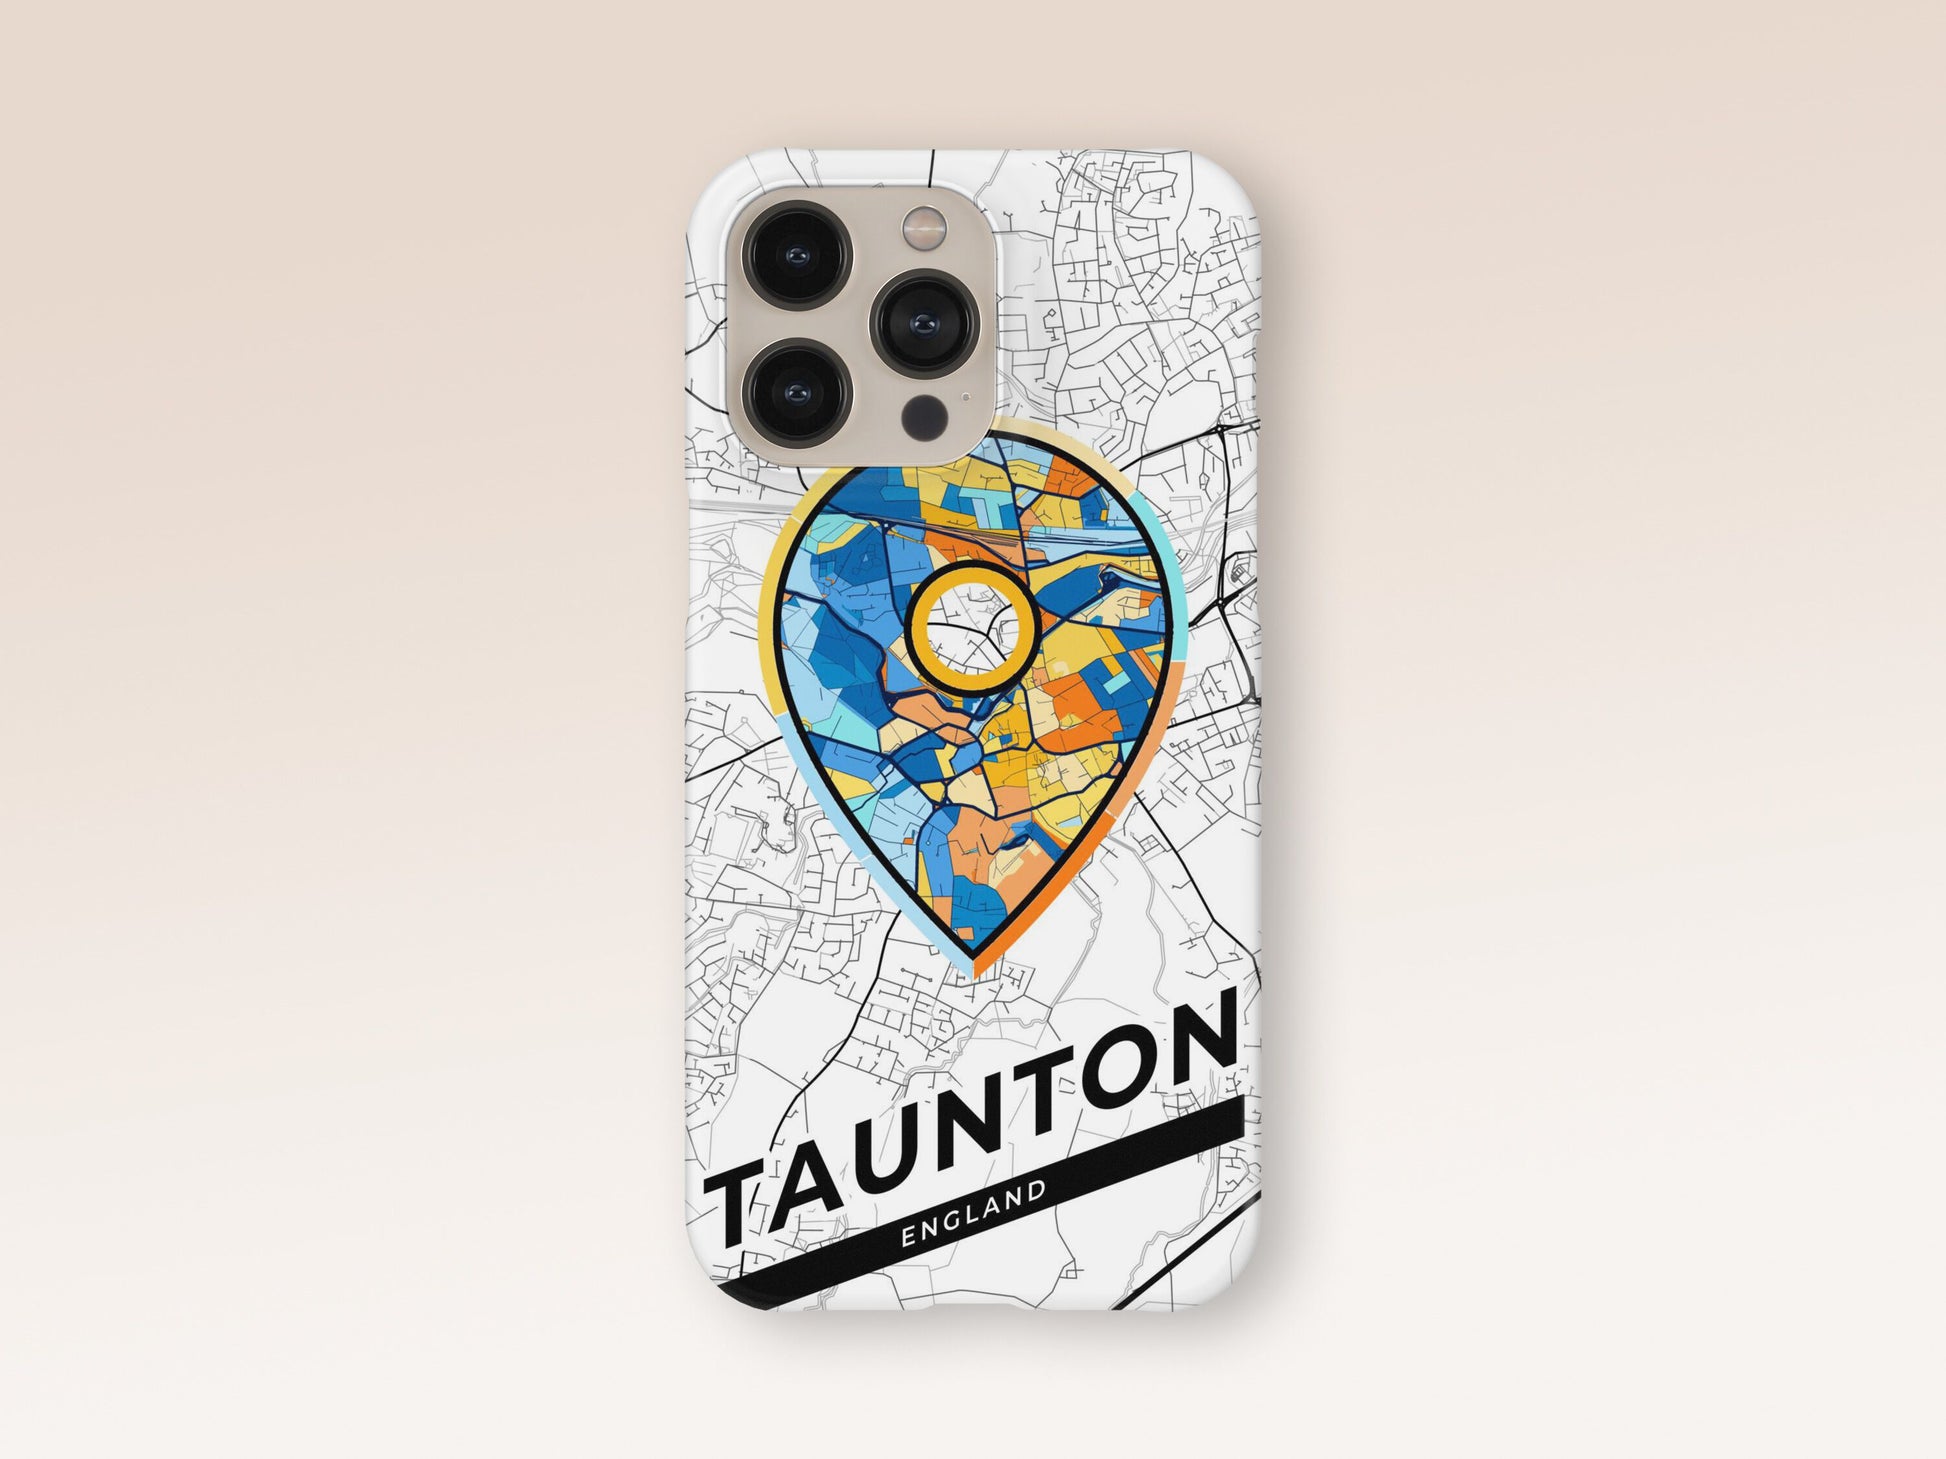 Taunton England slim phone case with colorful icon 1